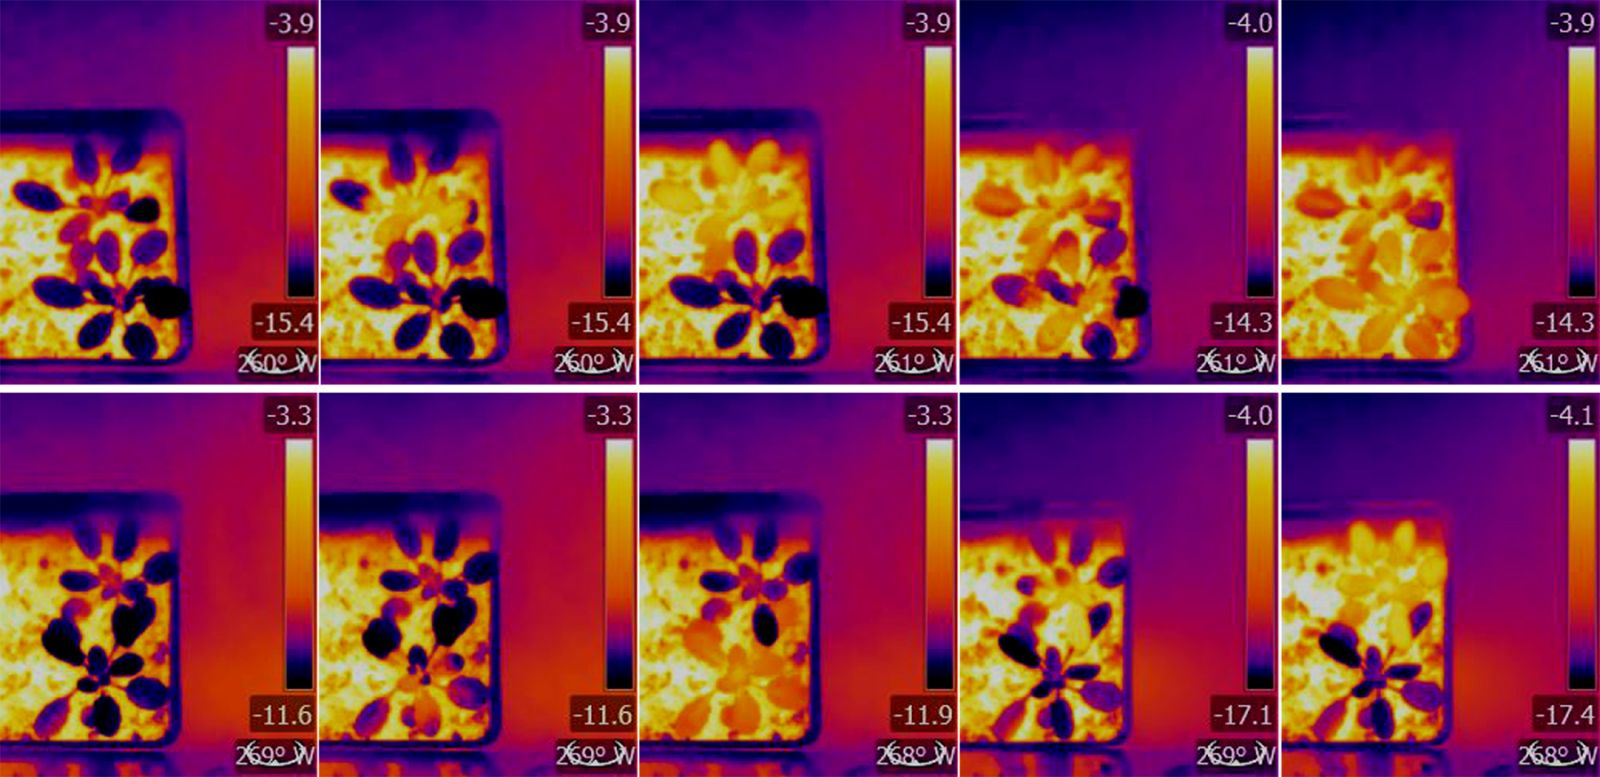 Using infrared thermography, the team could visualize heat stress in the plants.